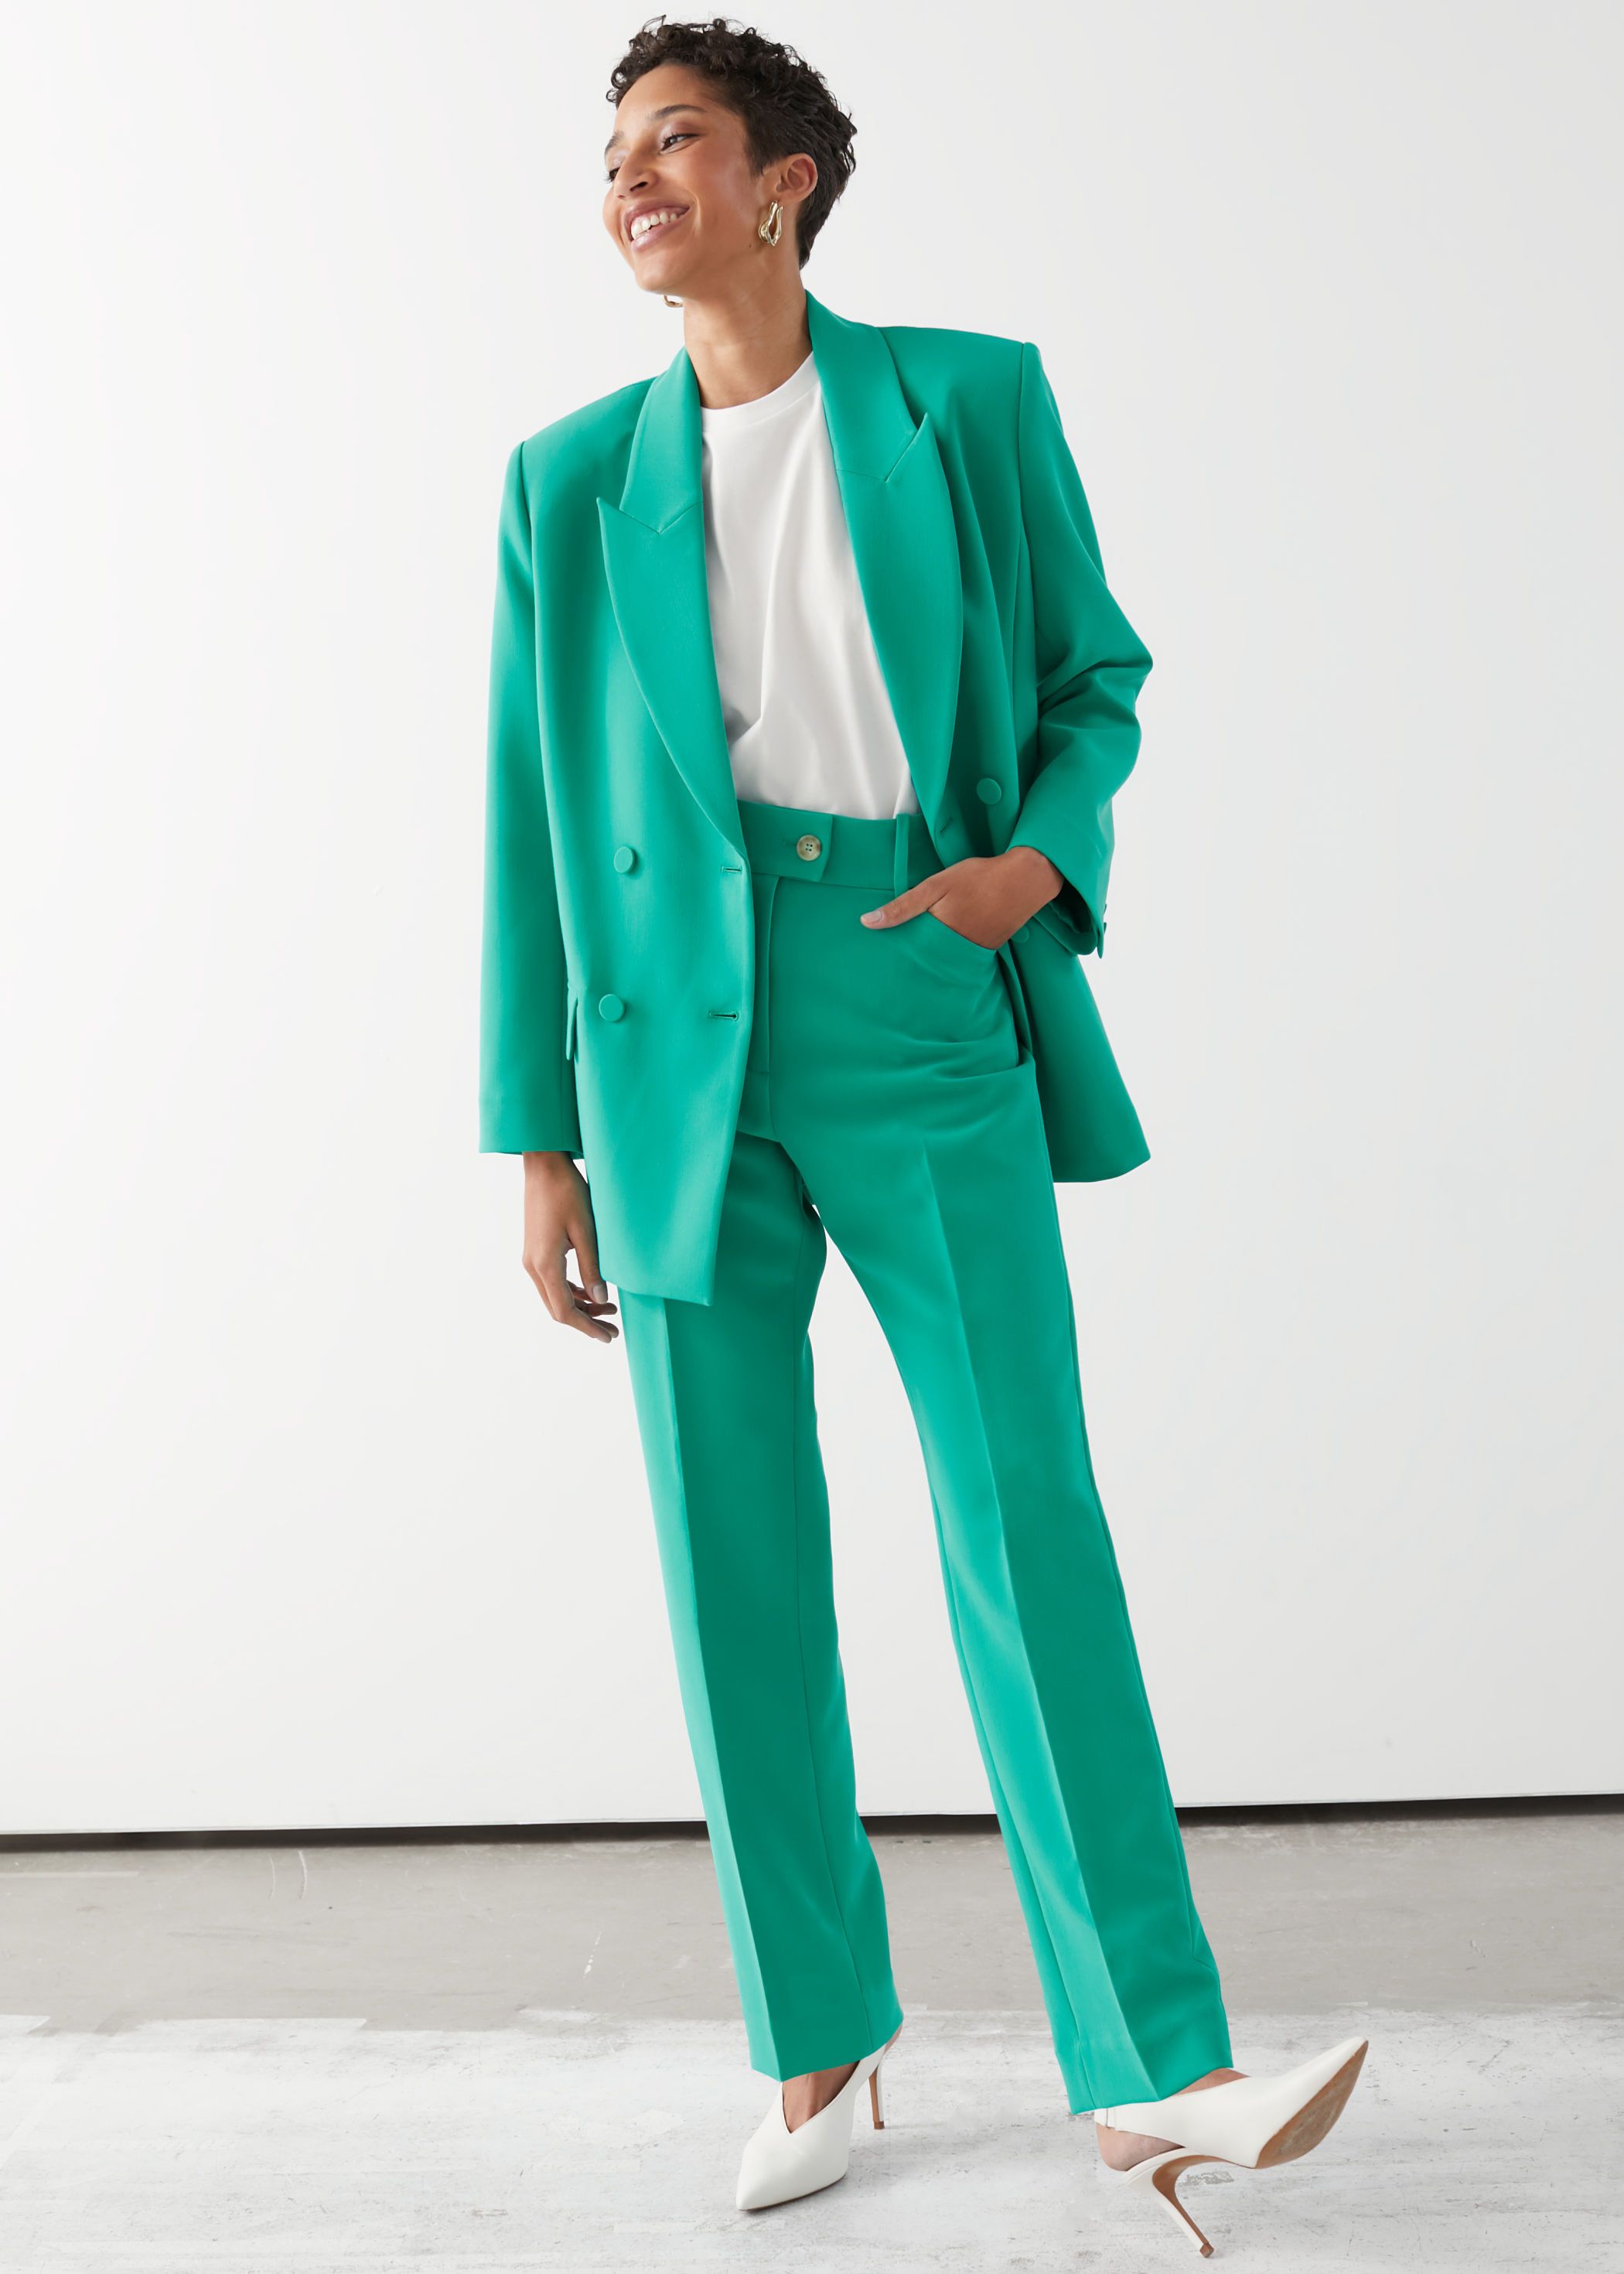 choose best and perfect women suits brands new york fashion show